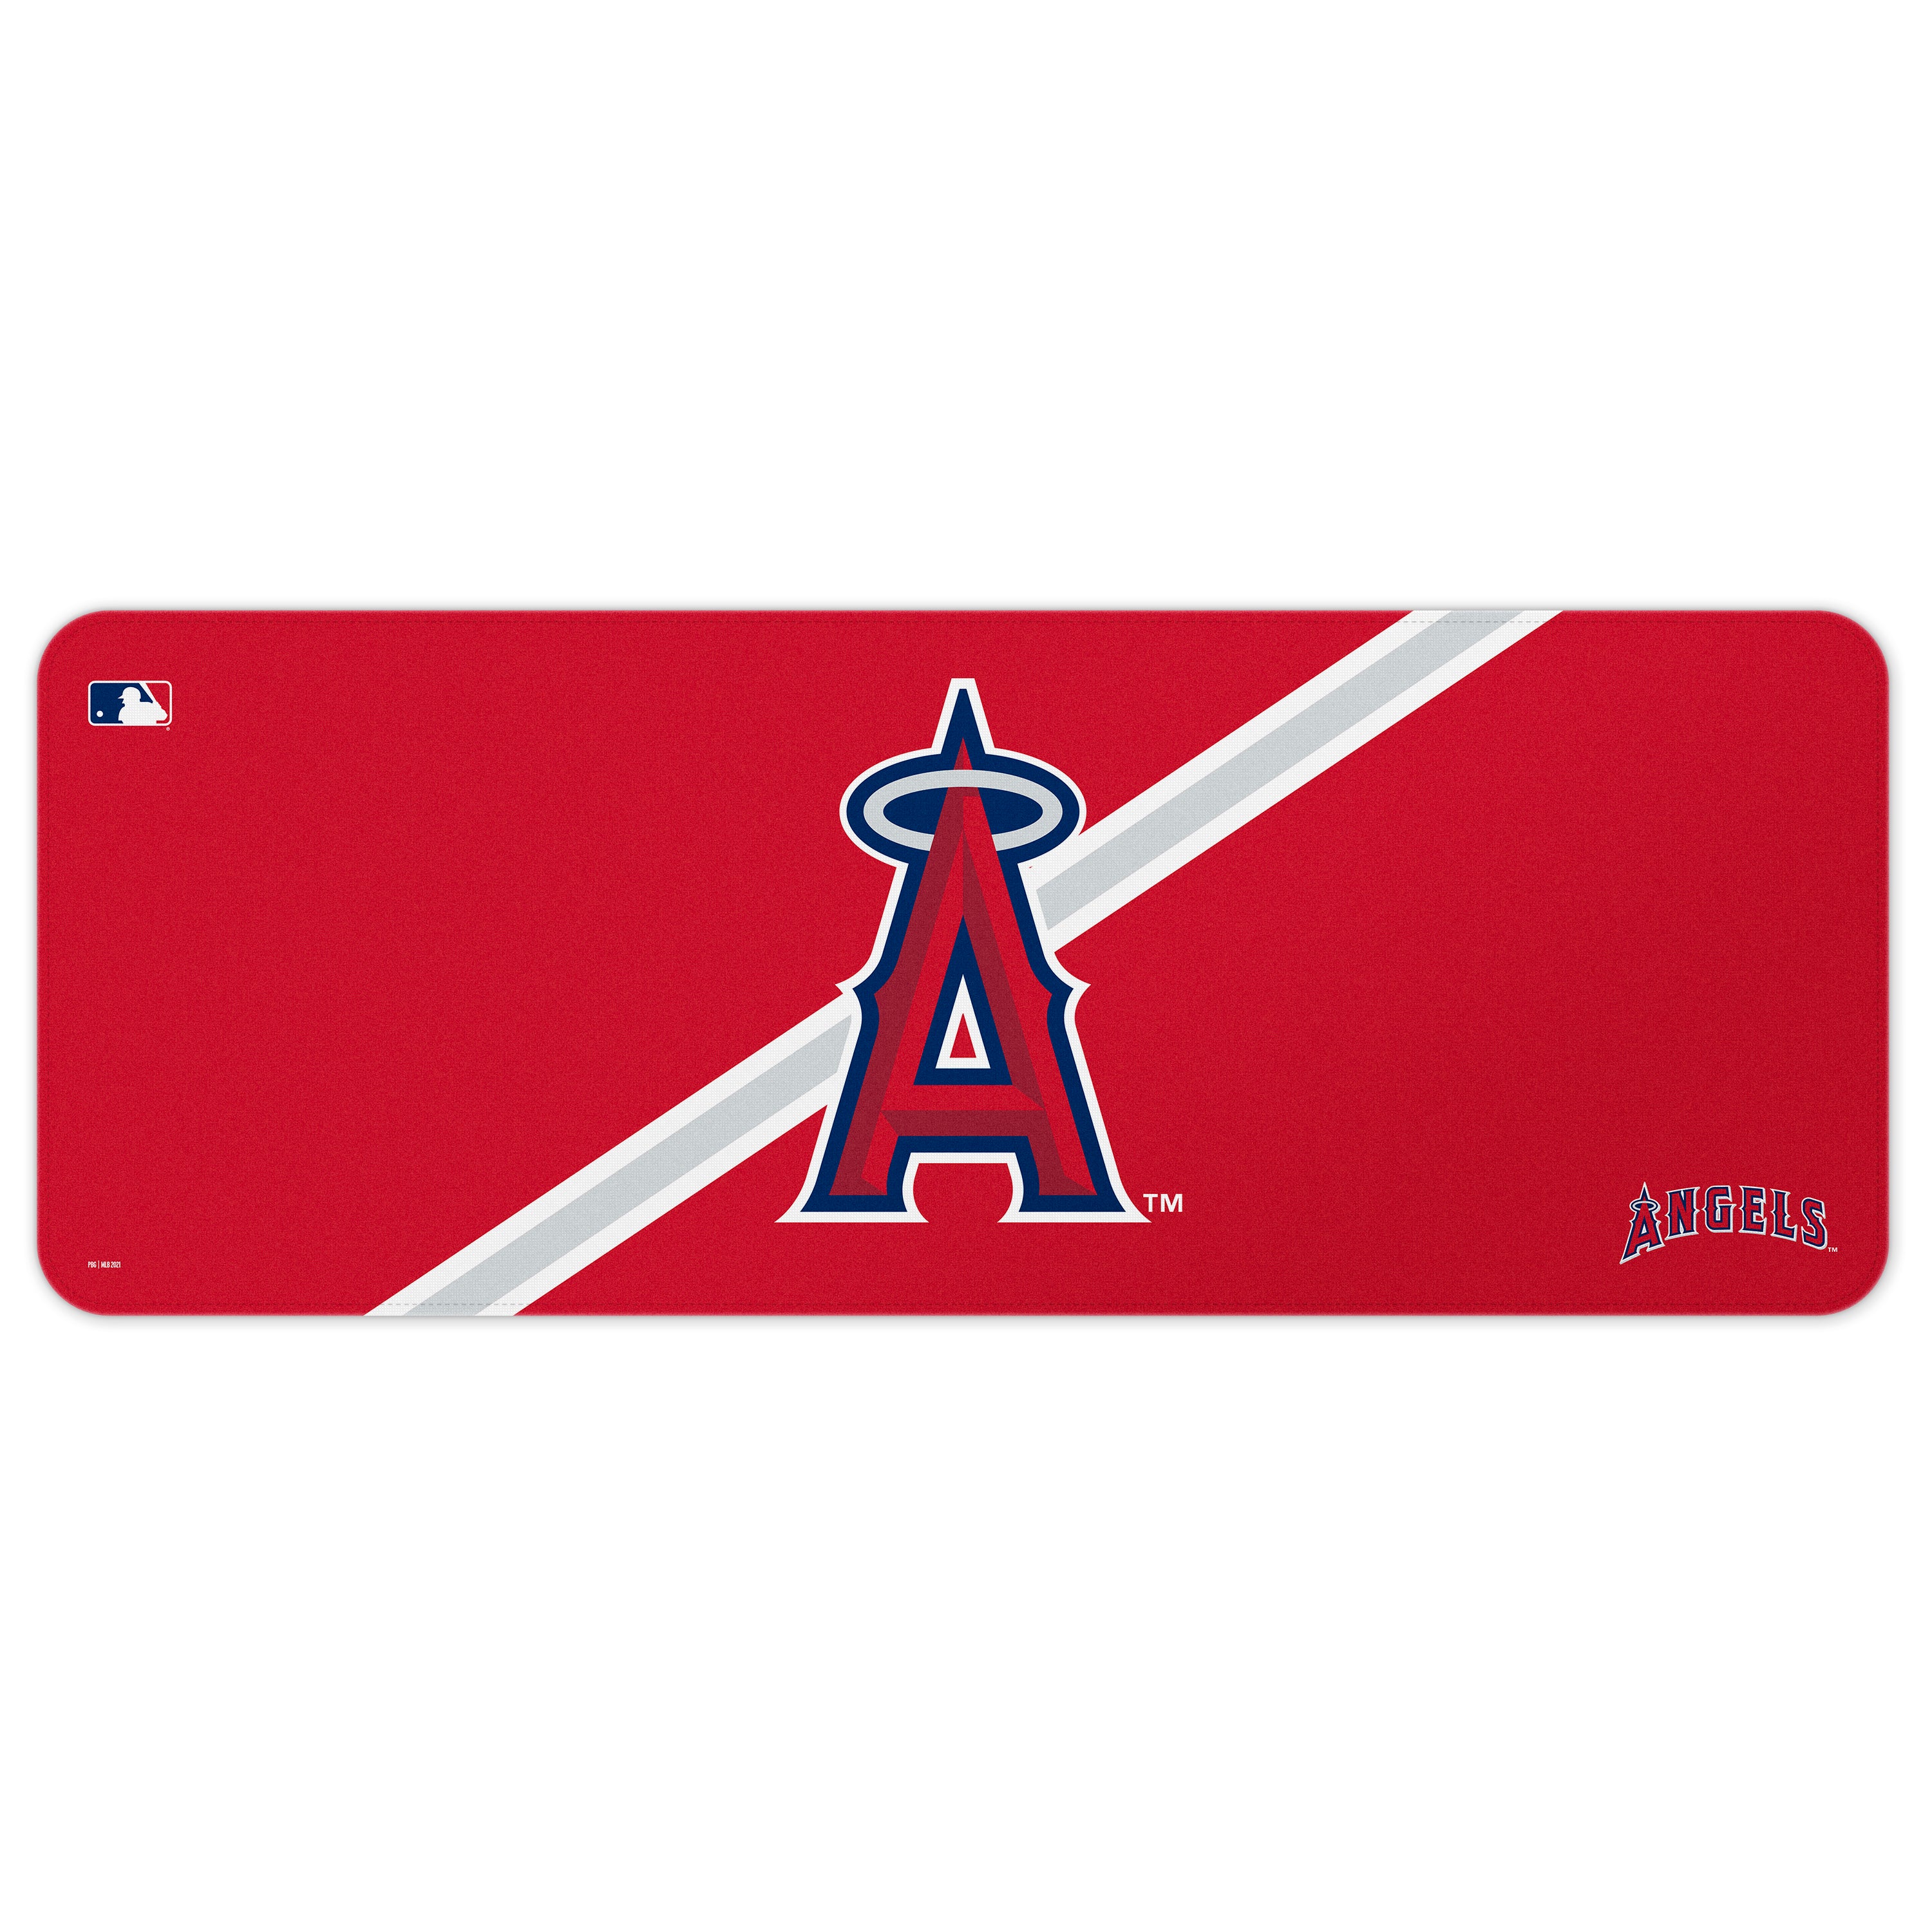 Officially Licensed MLB Logo Series Desk Pad - Boston Red Sox